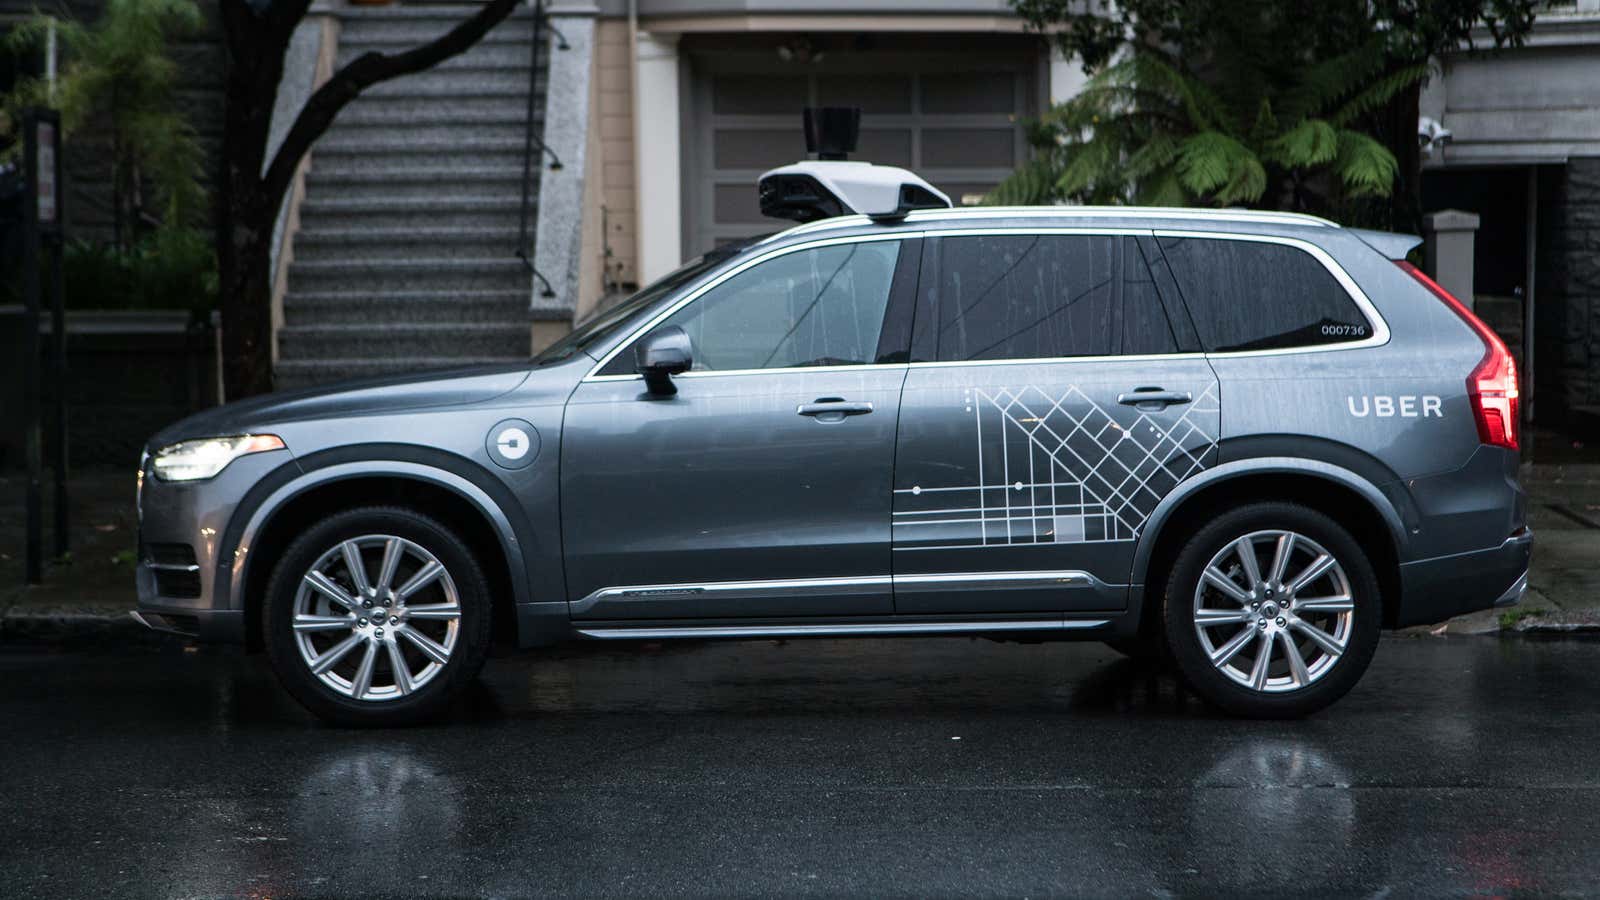 One of the Volvo XC90s Uber is debuting in San Francisco.